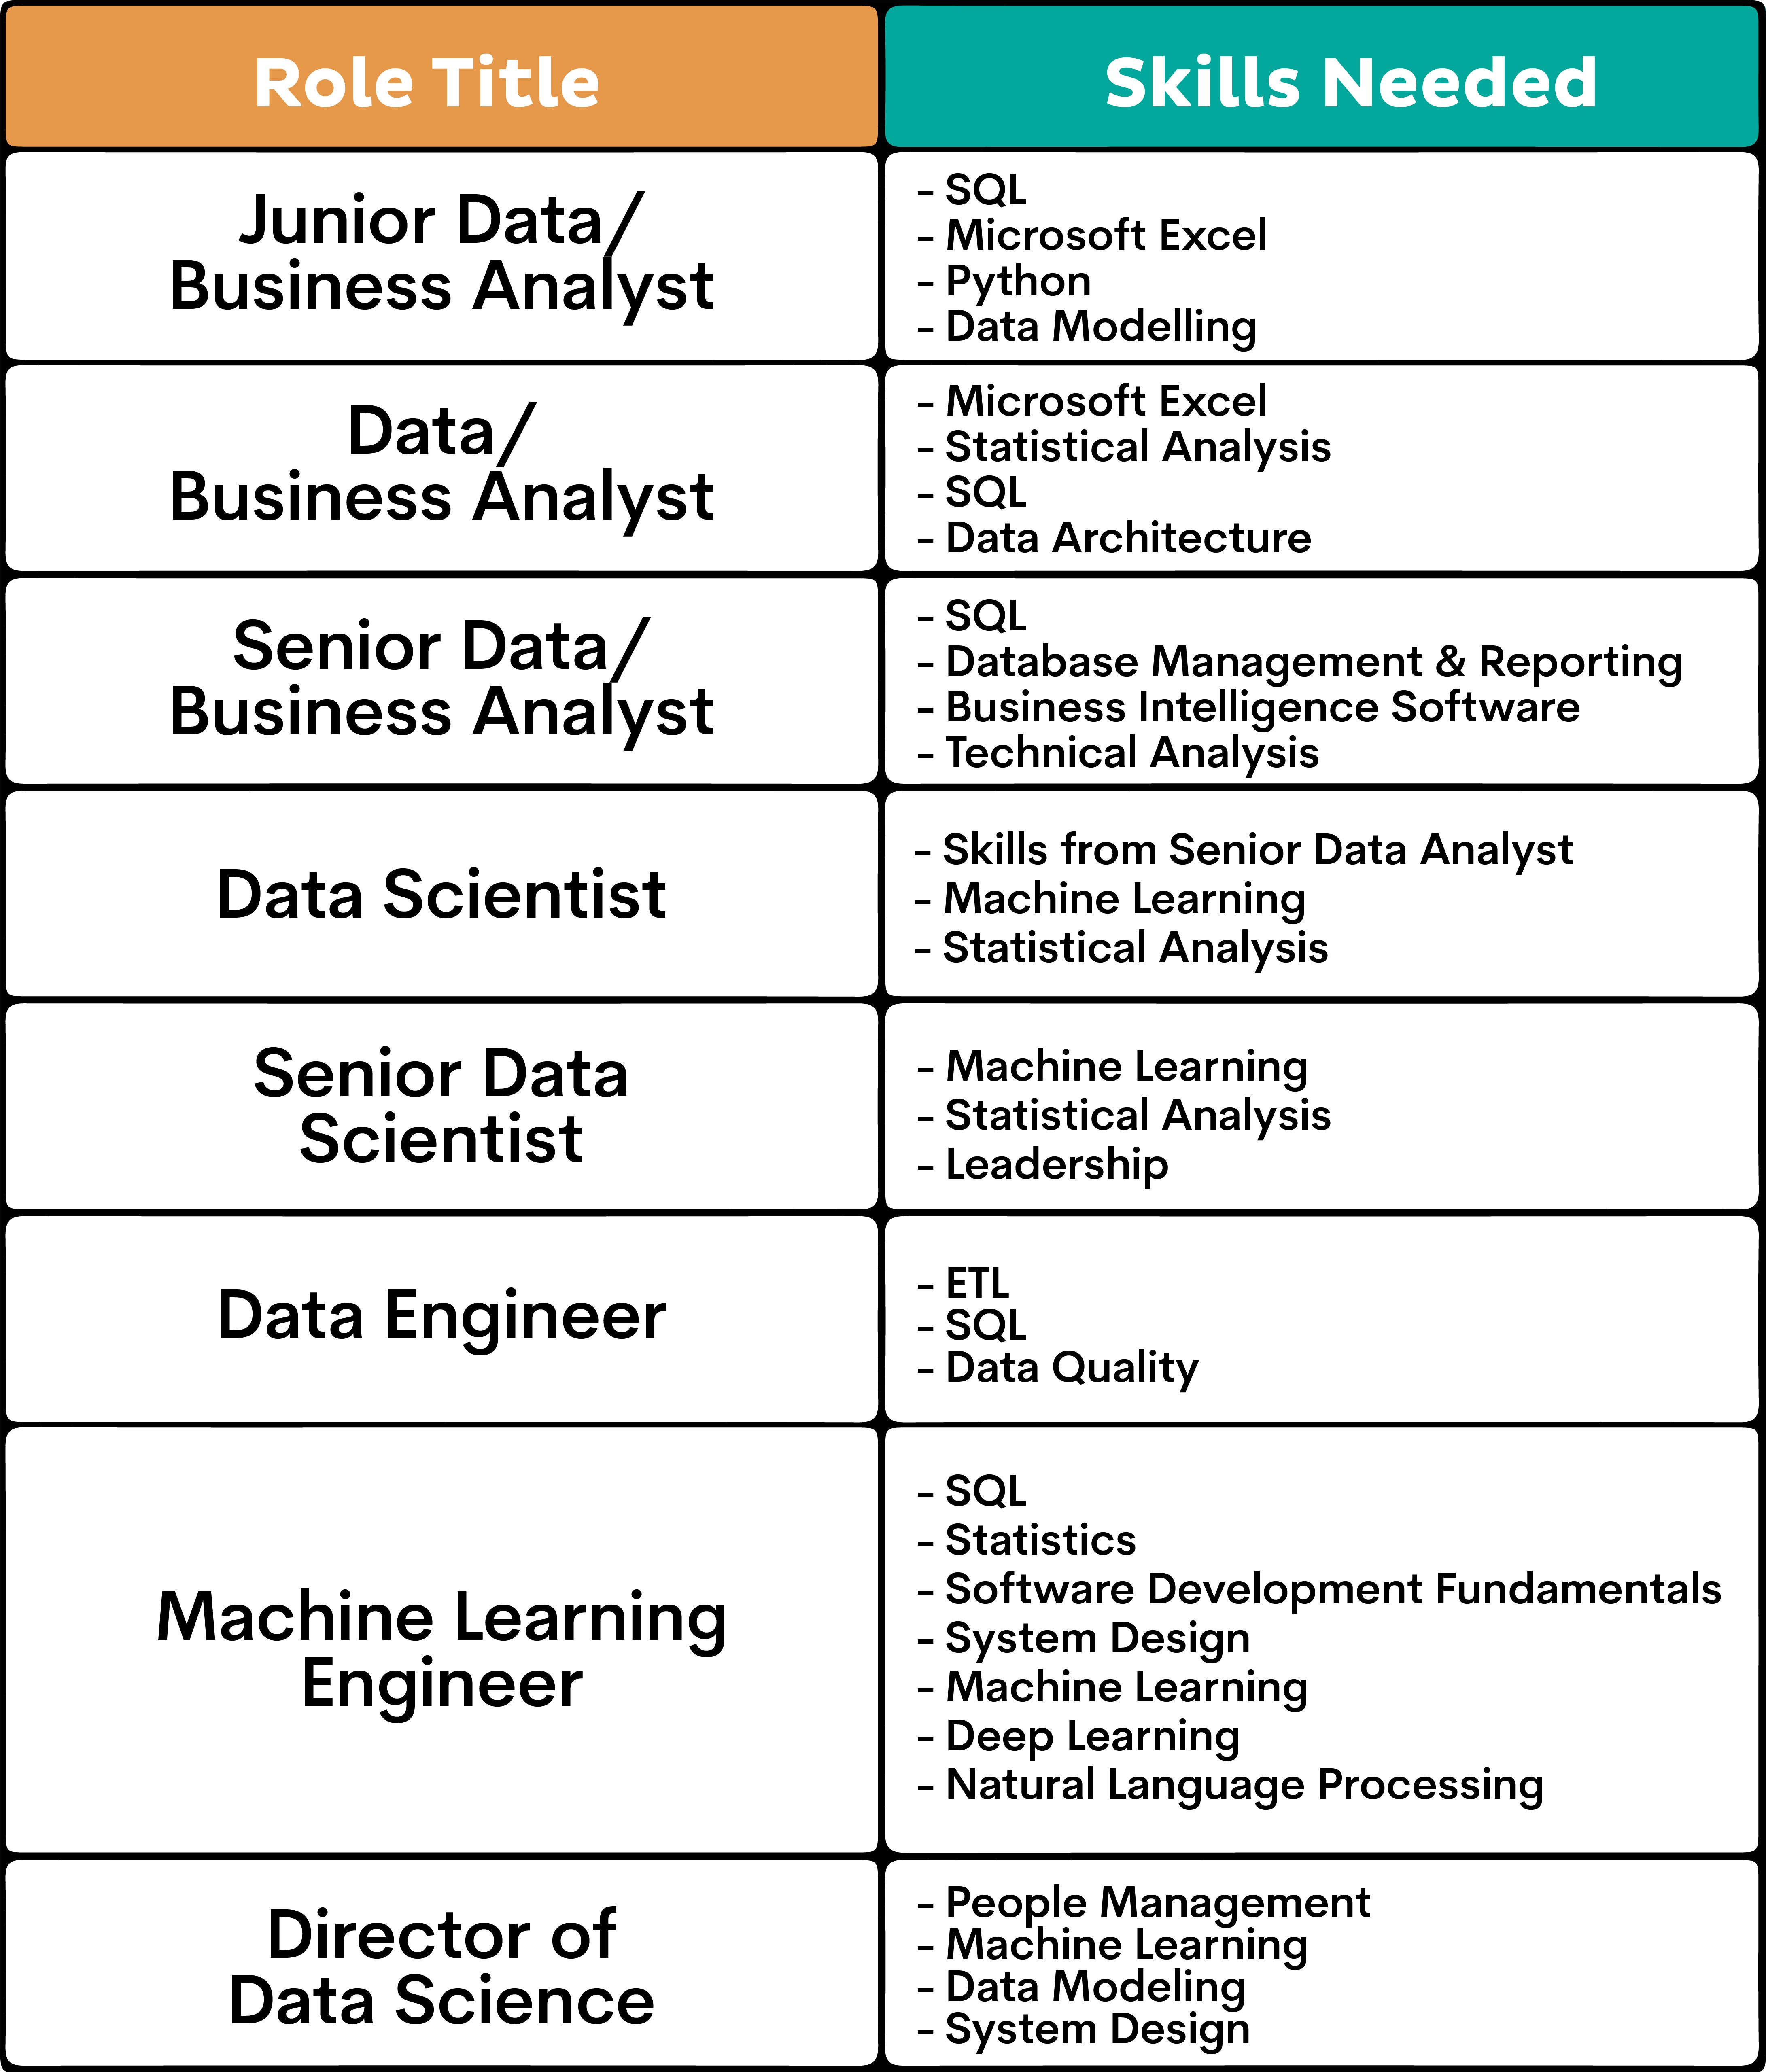 Data Scientist Salary depends on your skills